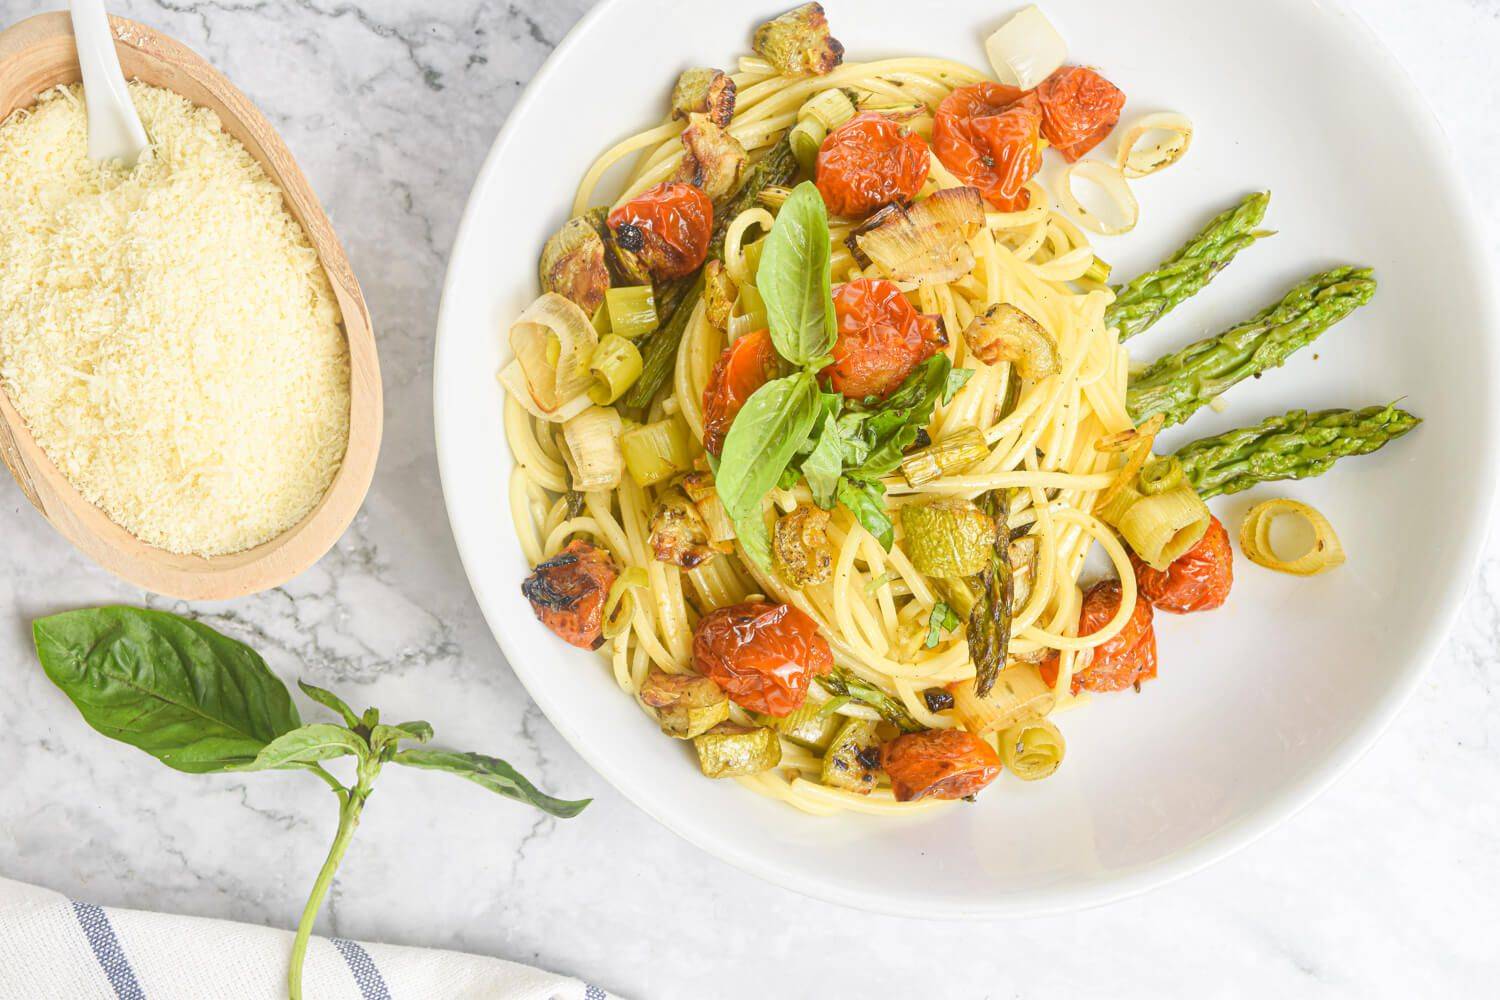 Healthy roasted vegetable pasta with tomatoes, asparagus, and onions with Parmesan and basil on the side.